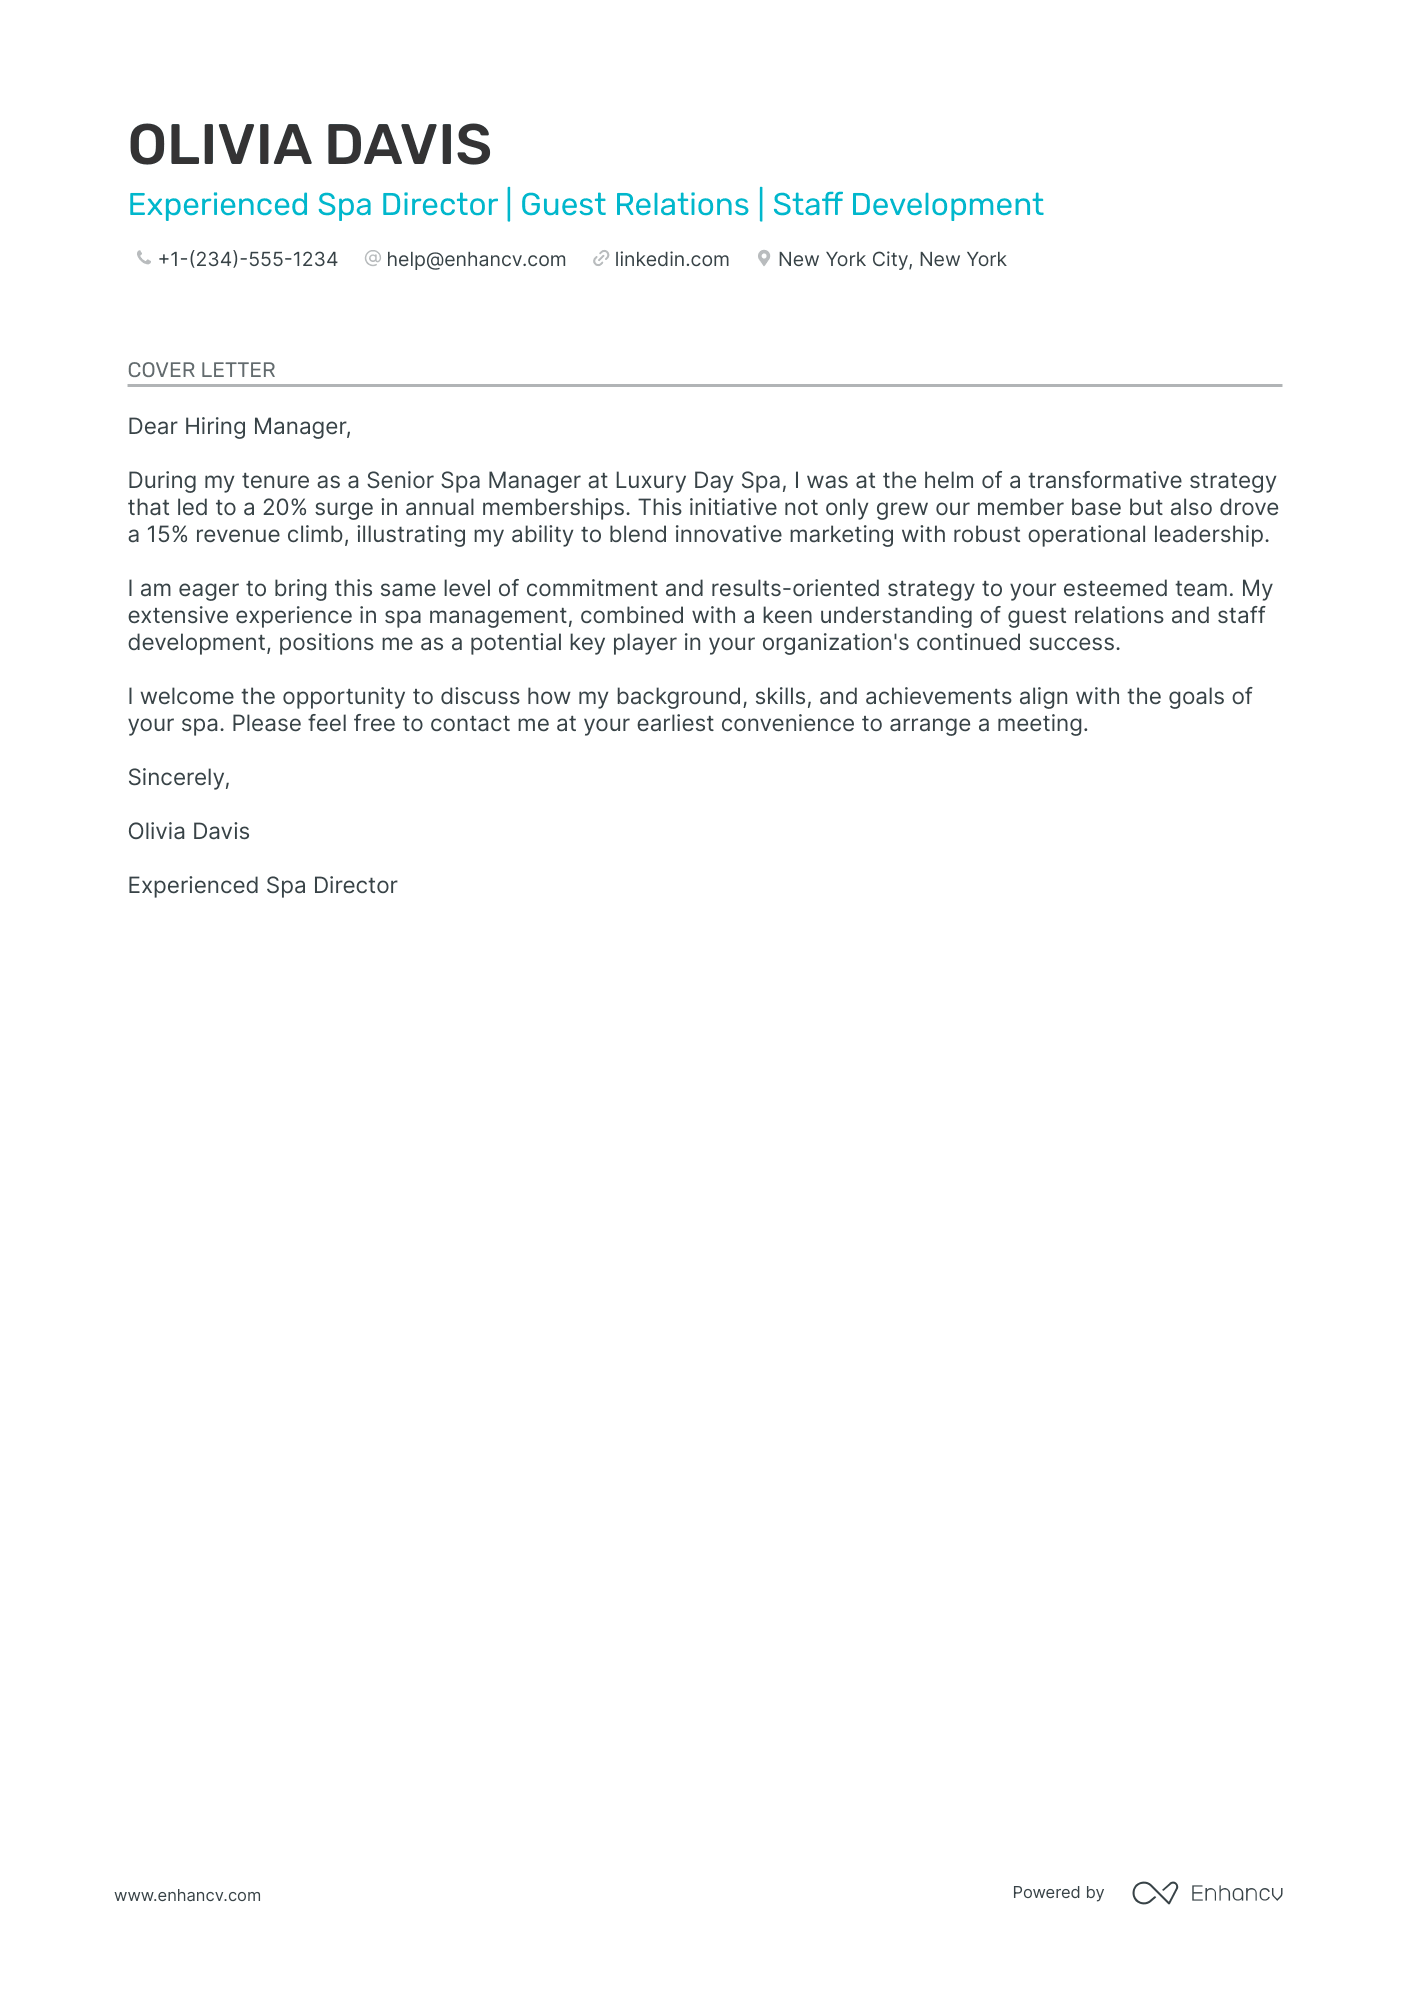 Spa Director cover letter